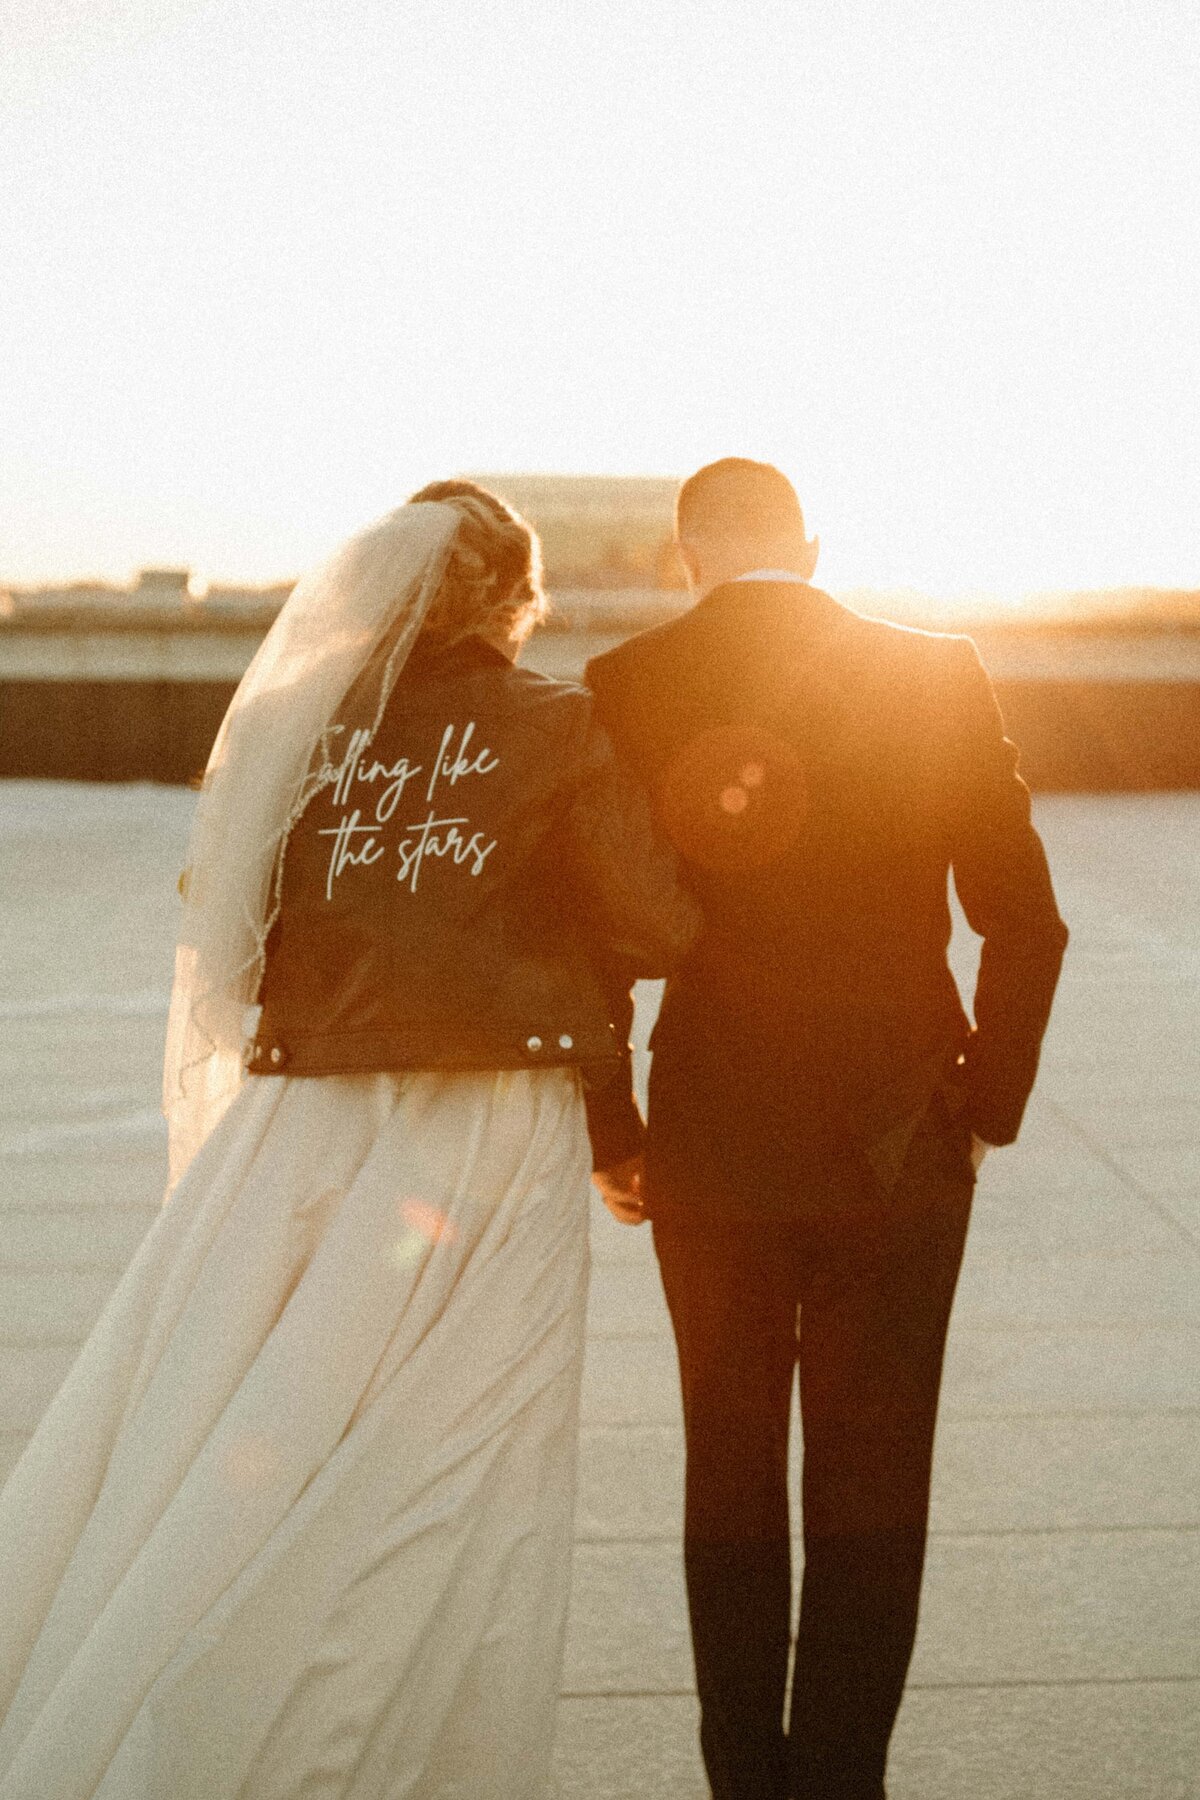 A bride in a white dress and a groom in a suit walk hand in hand during an Iowa sunset, with the bride's jacket embroidered with "bring me the stars.